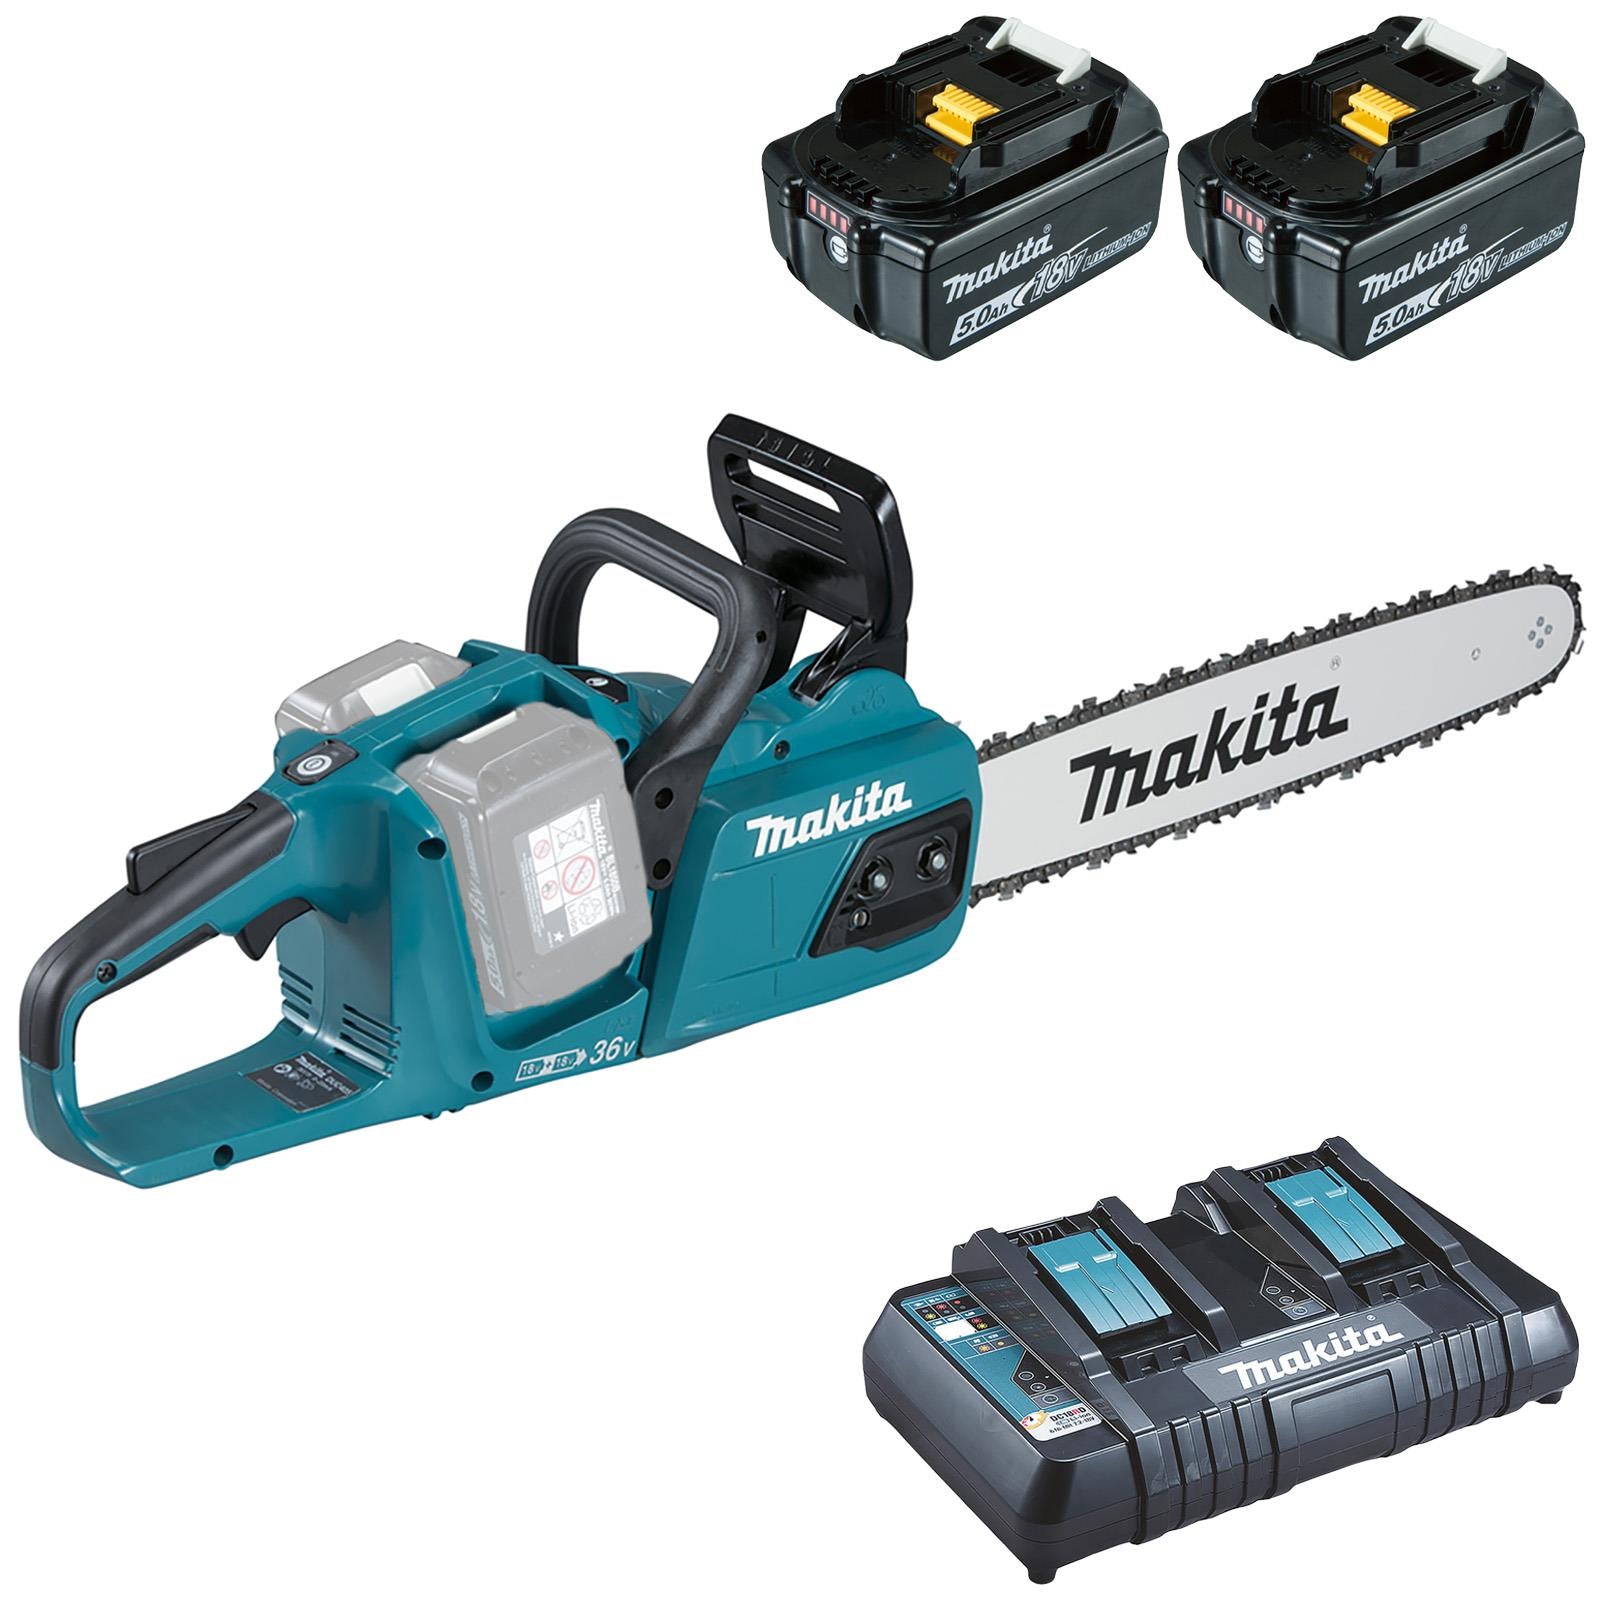 Makita Chainsaw Kit 40cm 16" 18V x 2 LXT Brushless Cordless 2 x 5Ah Battery and Dual Rapid Charger Garden Tree Cutting Pruning DUC405PT2